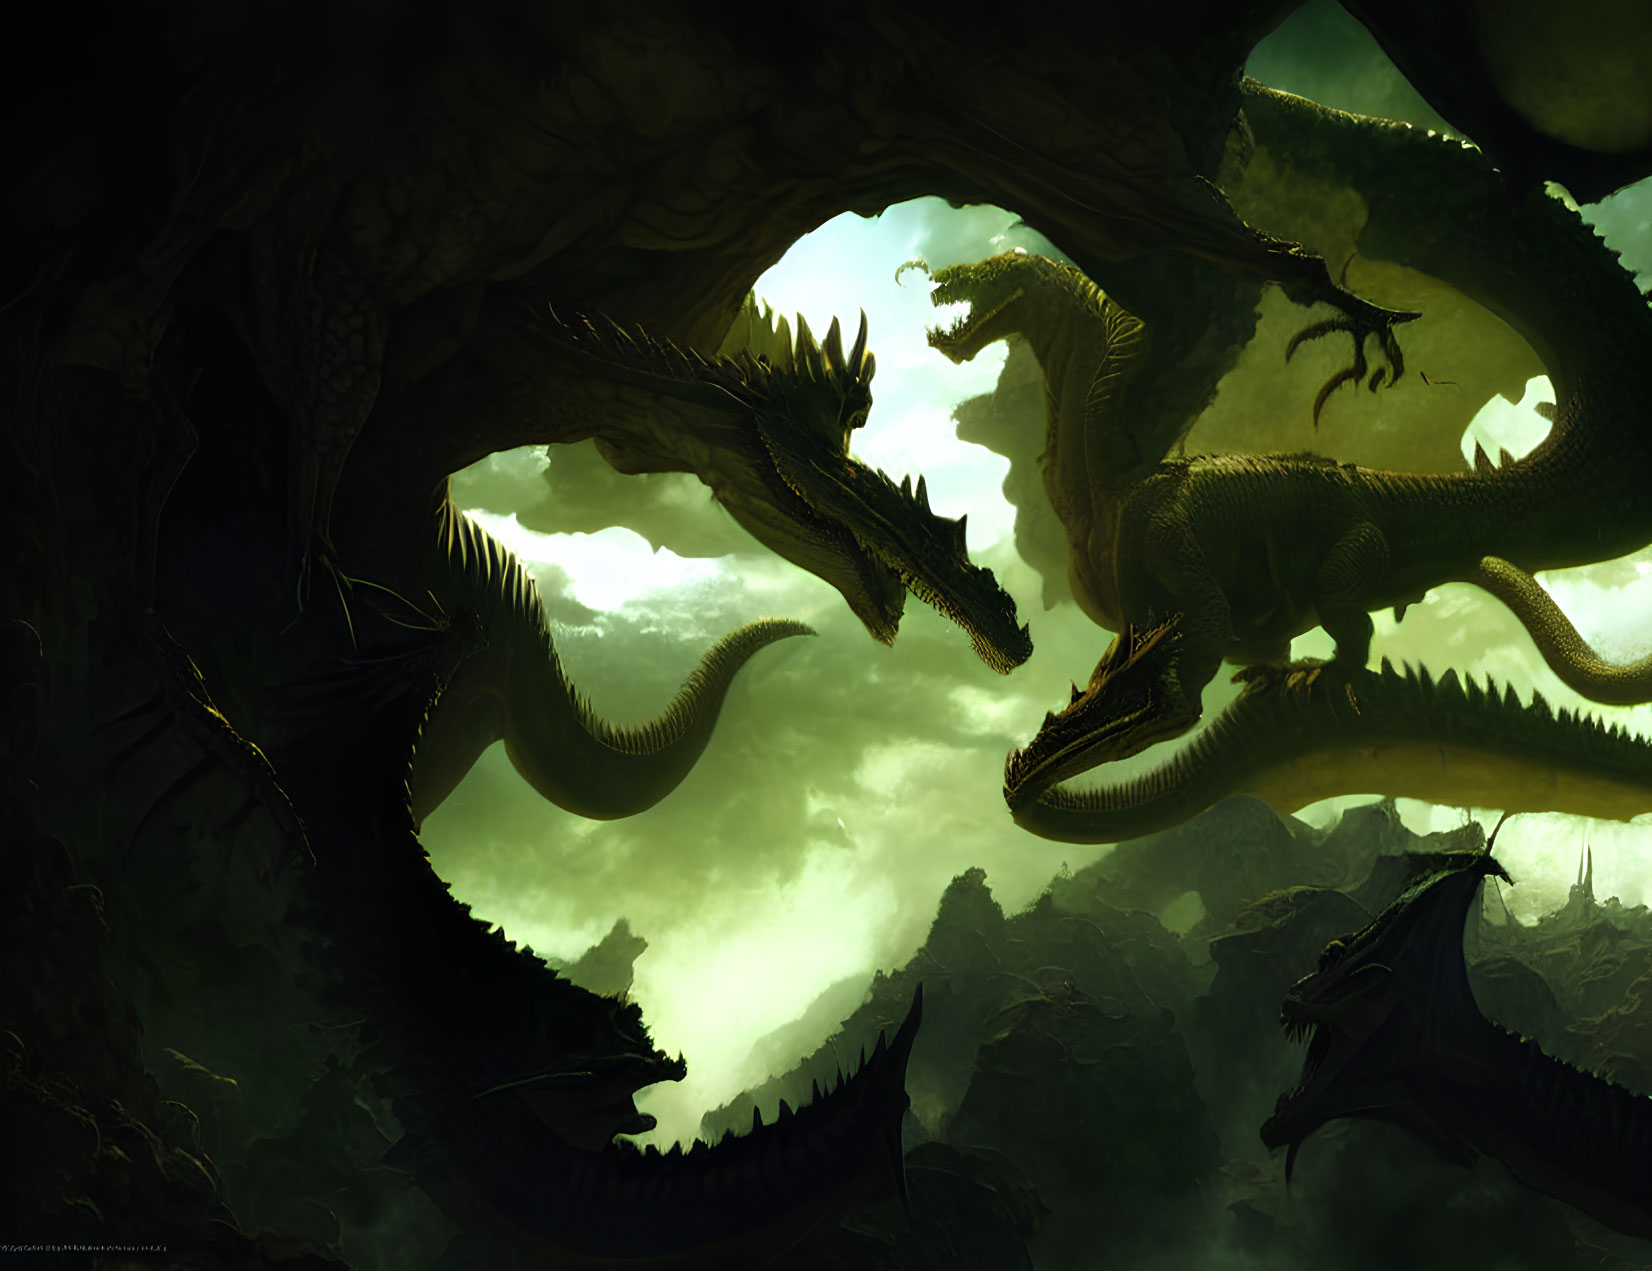 Four majestic dragons silhouetted in dark cavern with eerie green glow.